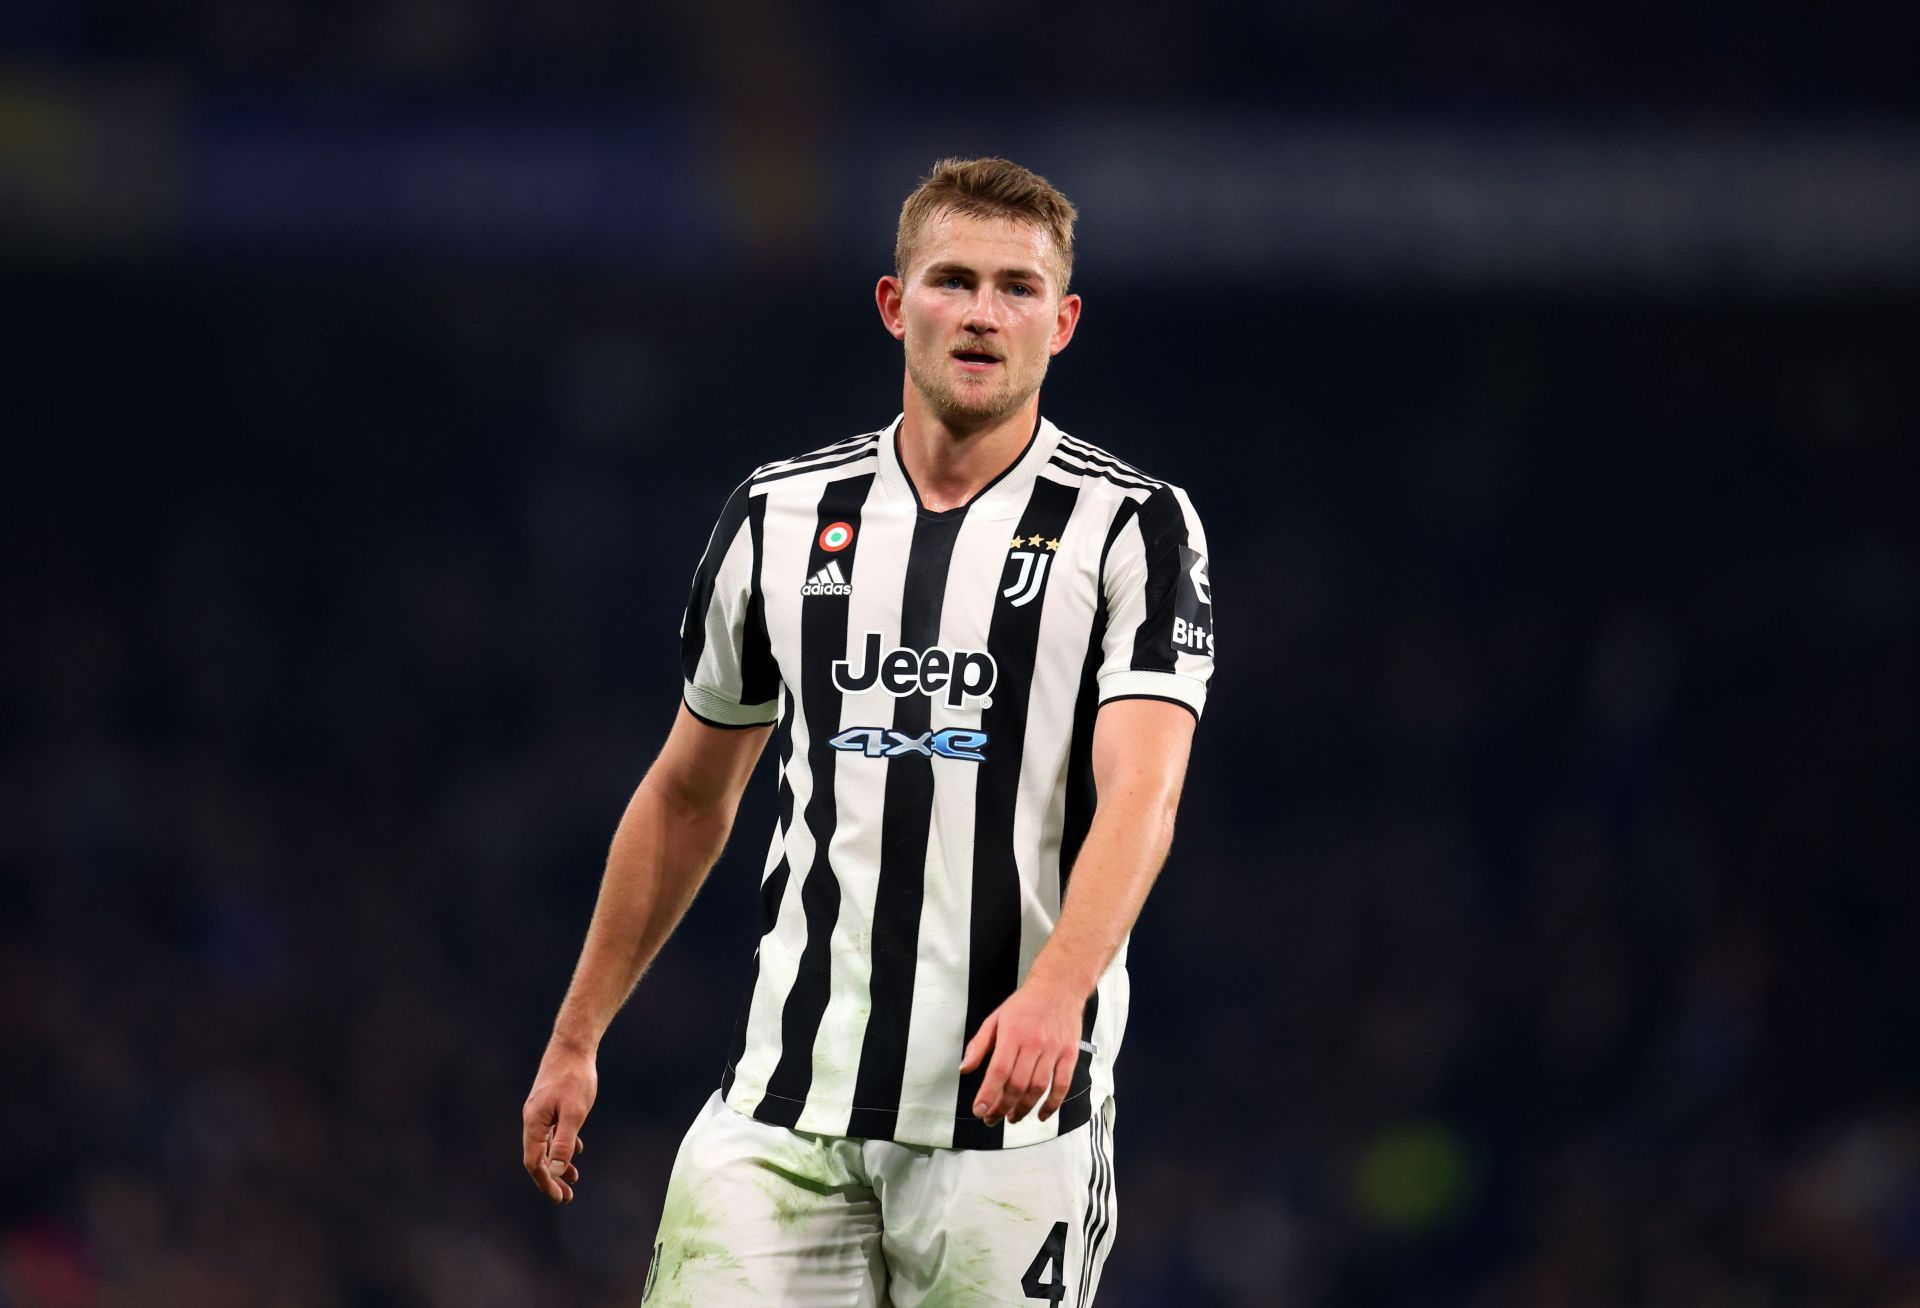 The Red Devils face competition from Barcelona for Matthijs de Ligt.